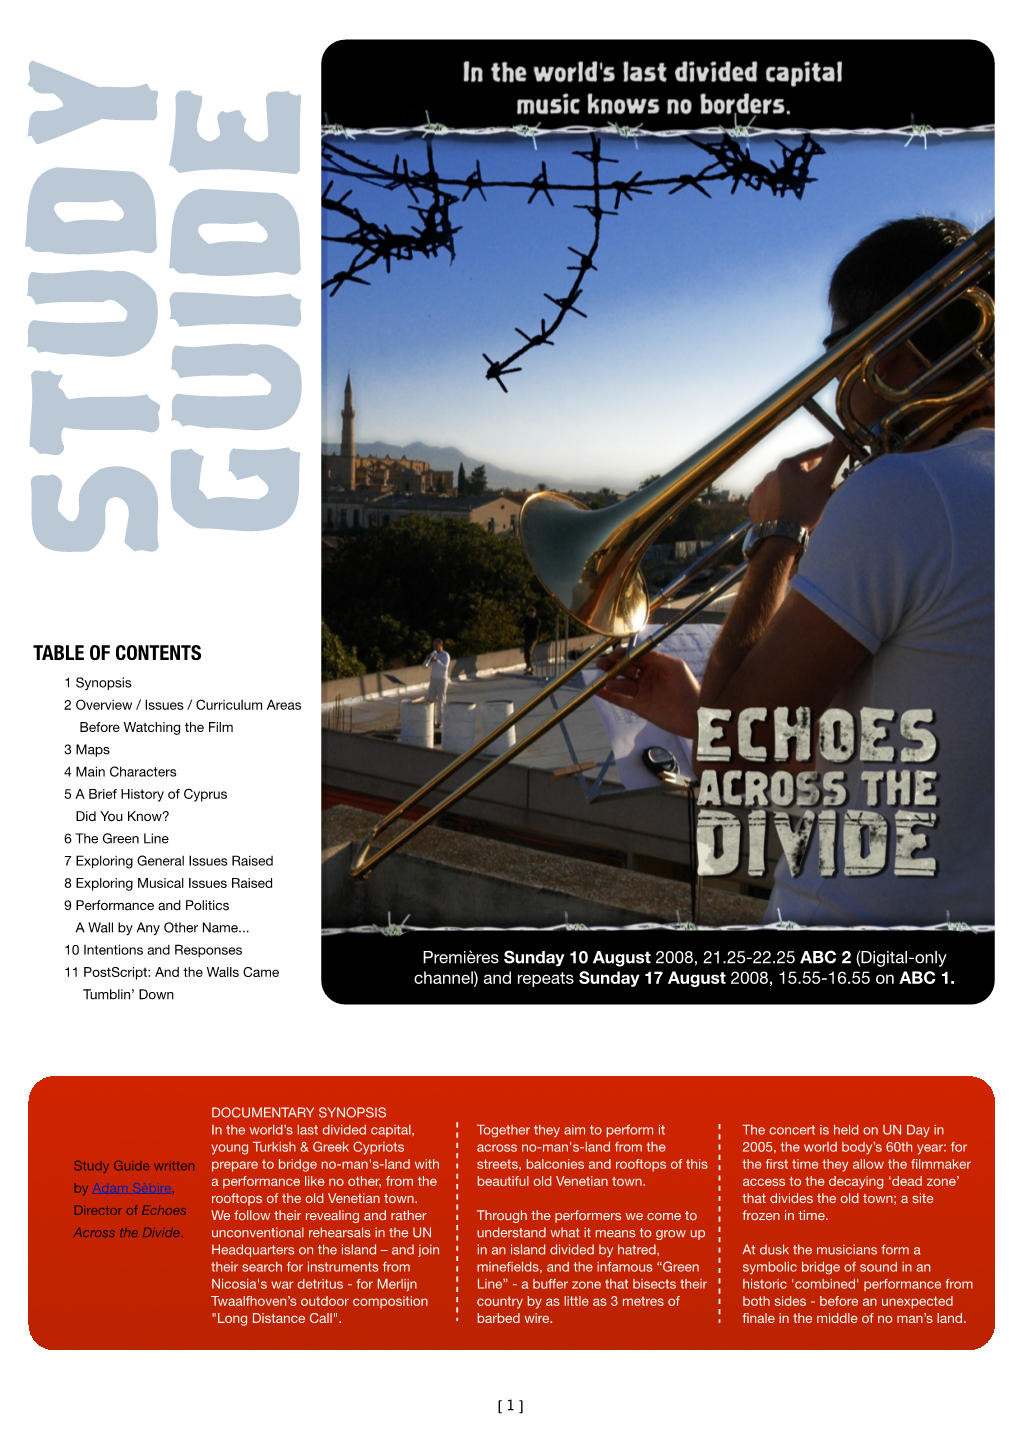 Echoes Across the Divide, by Australian • Attitudes of Everyday Cypriot People